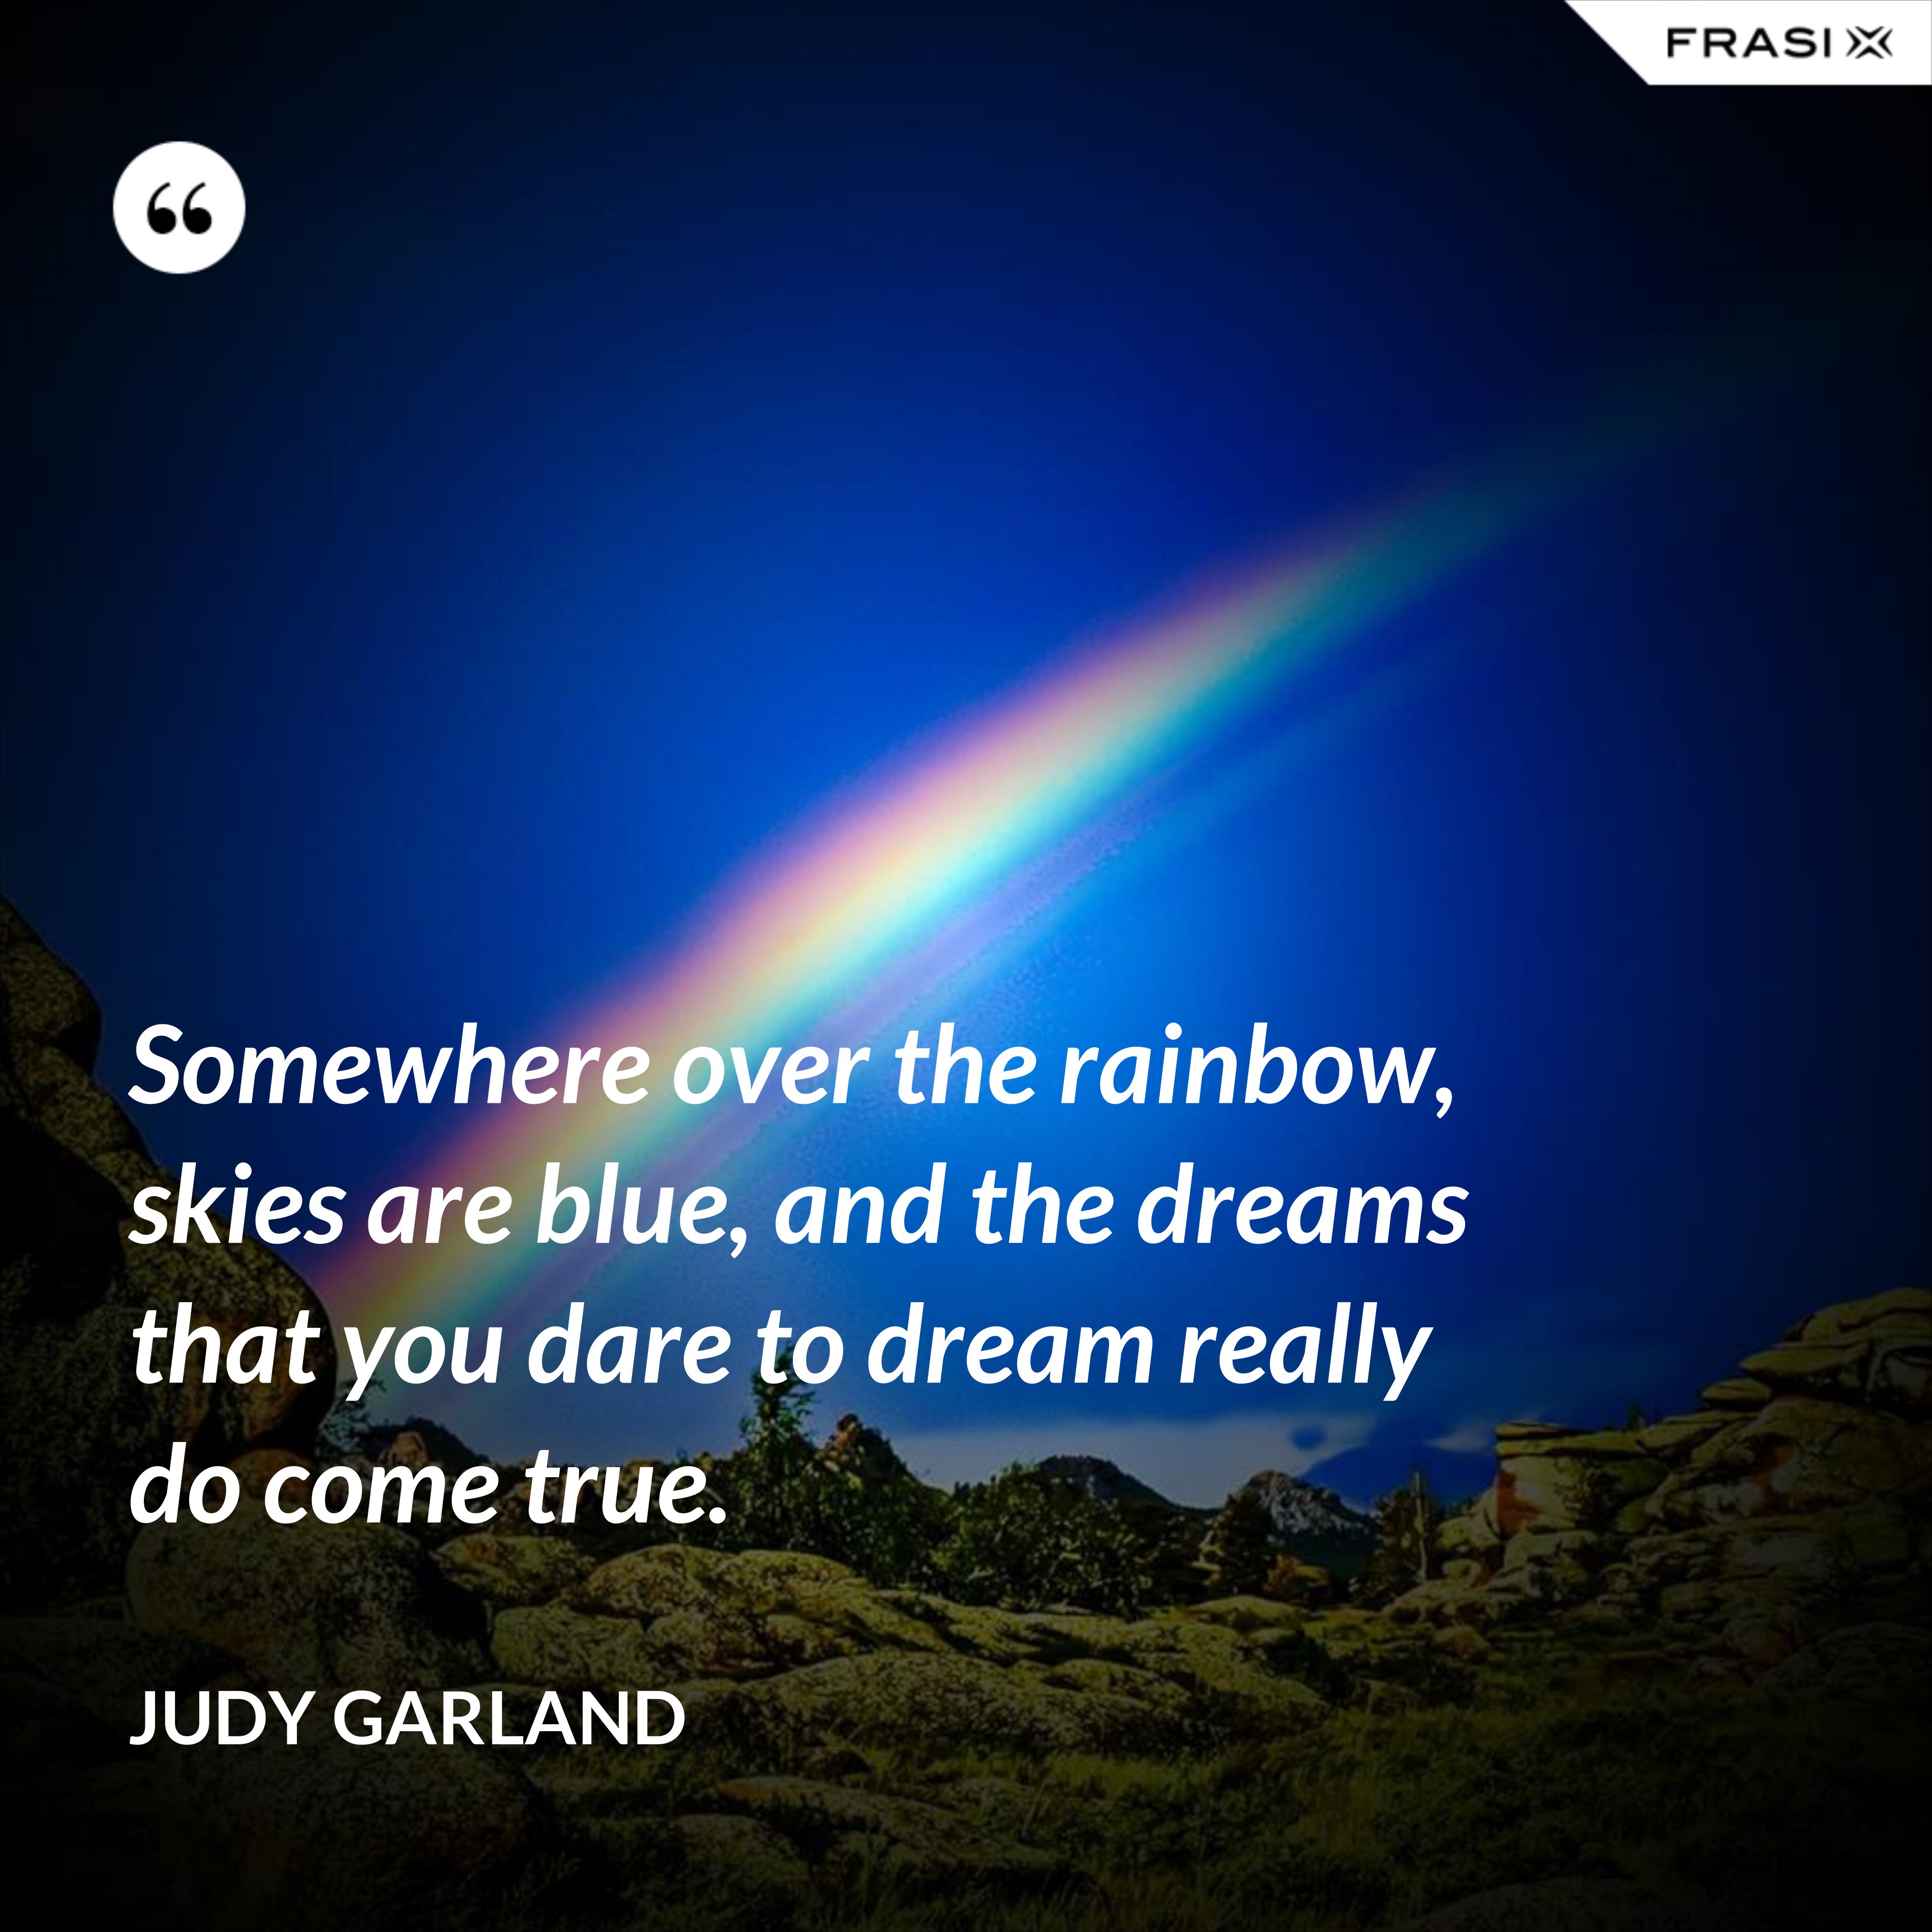 Somewhere over the rainbow, skies are blue, and the dreams that you dare to dream really do come true. - Judy Garland